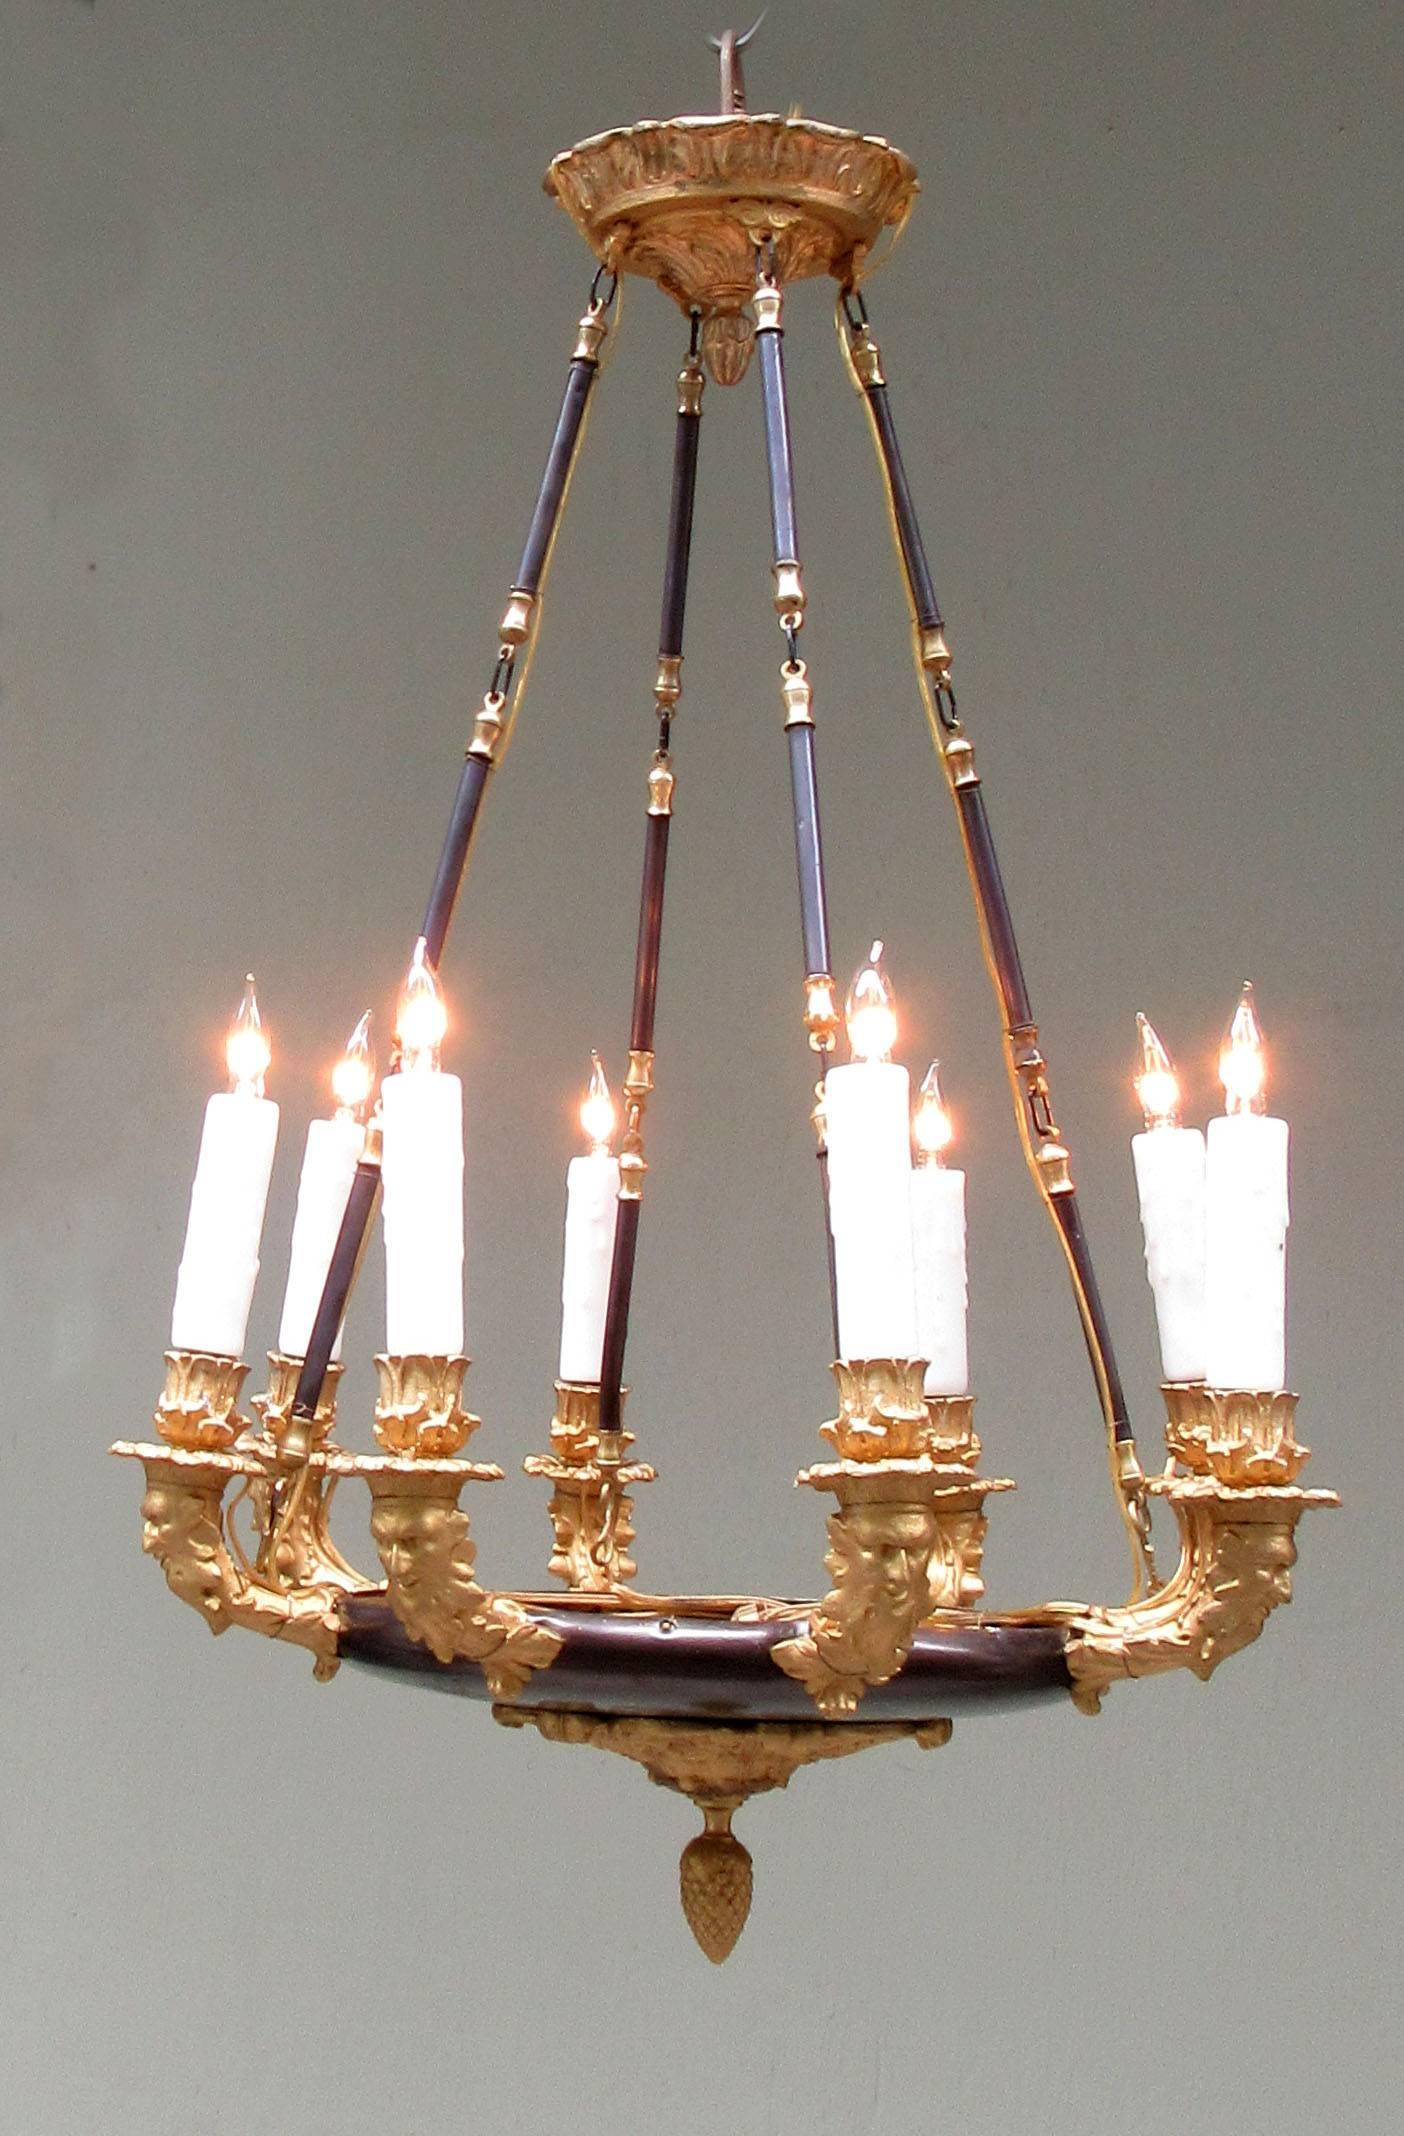 A 19th century French Empire chandelier, circa 1840, made of patinated brass and zinc and featuring eight candle arms adorned with north winds faces and pine cone finial. The chandelier has recently been cleaned, rewired and has new porcelain